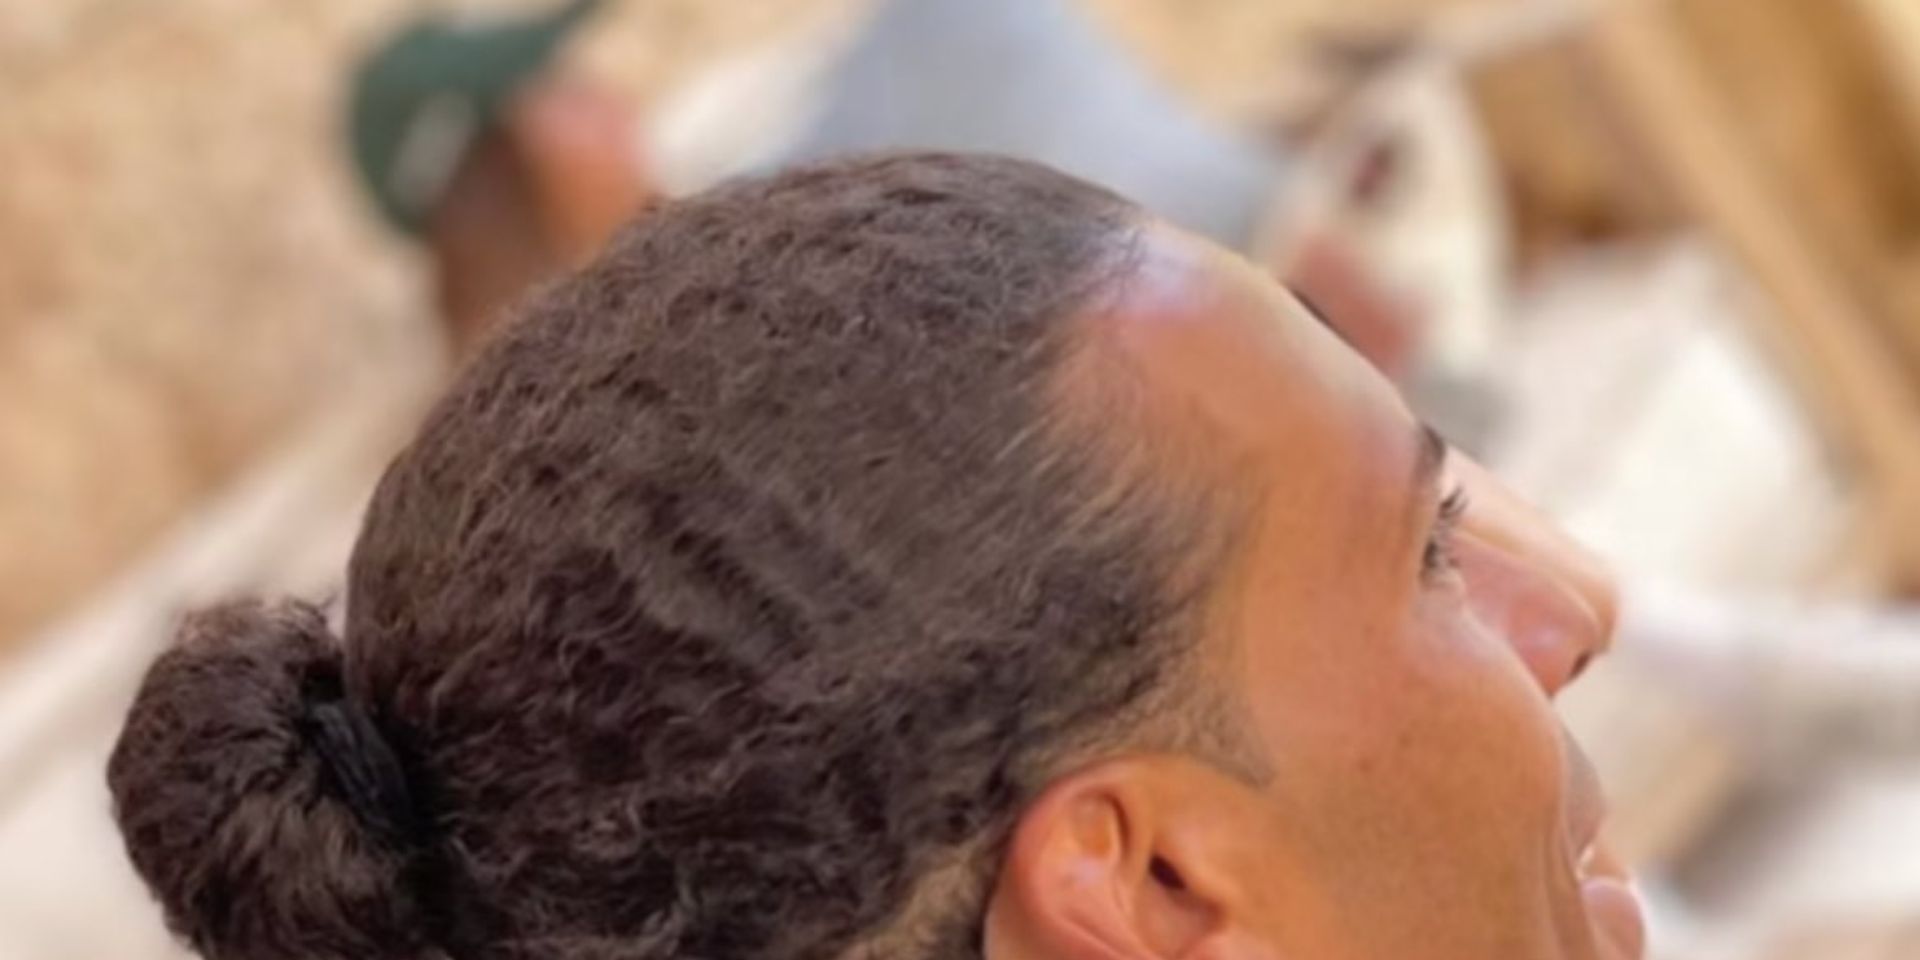 (Image) Van Dijk appears to show off new haircut ahead of City clash